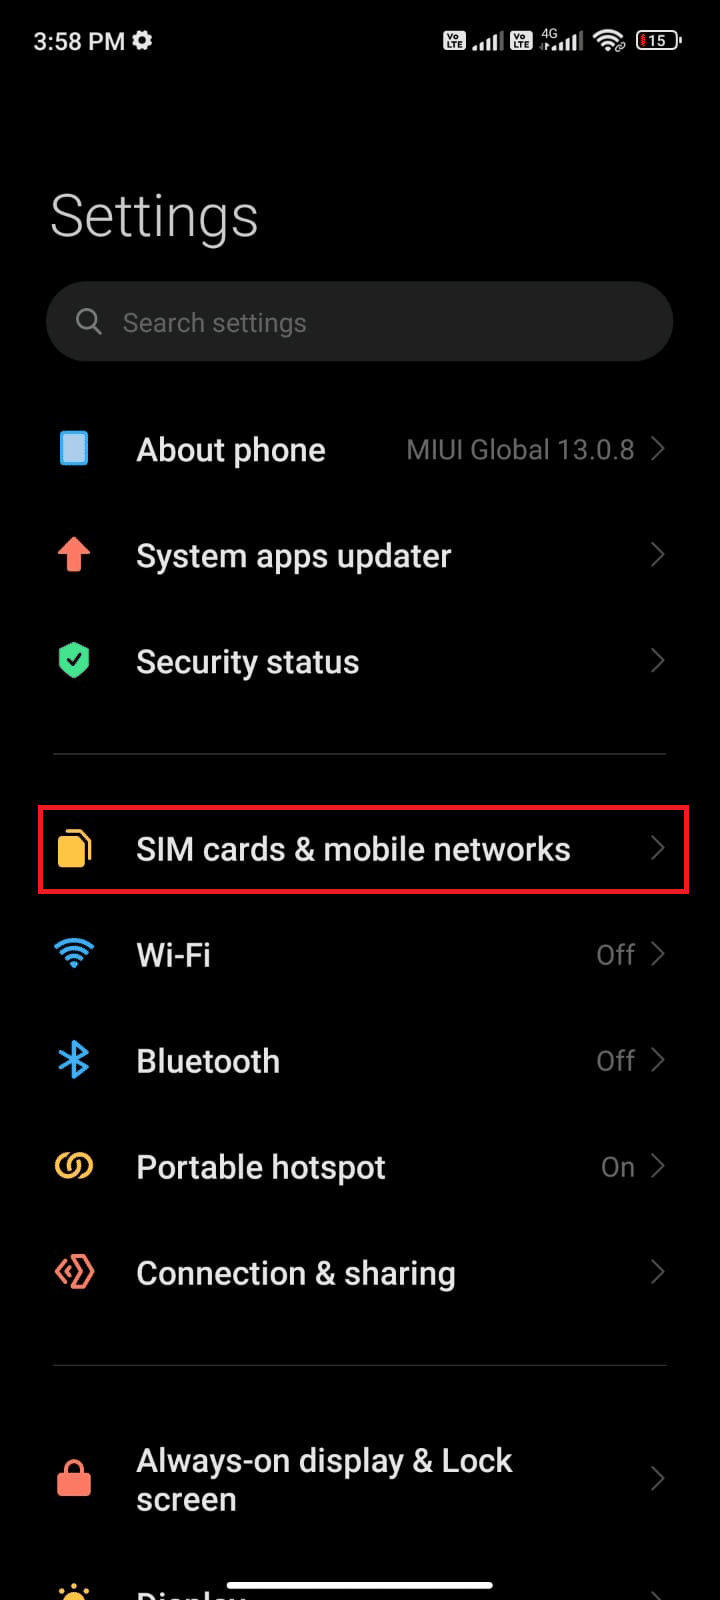 tap the SIM cards mobile networks option. Fix KingRoot Error Code 0X1